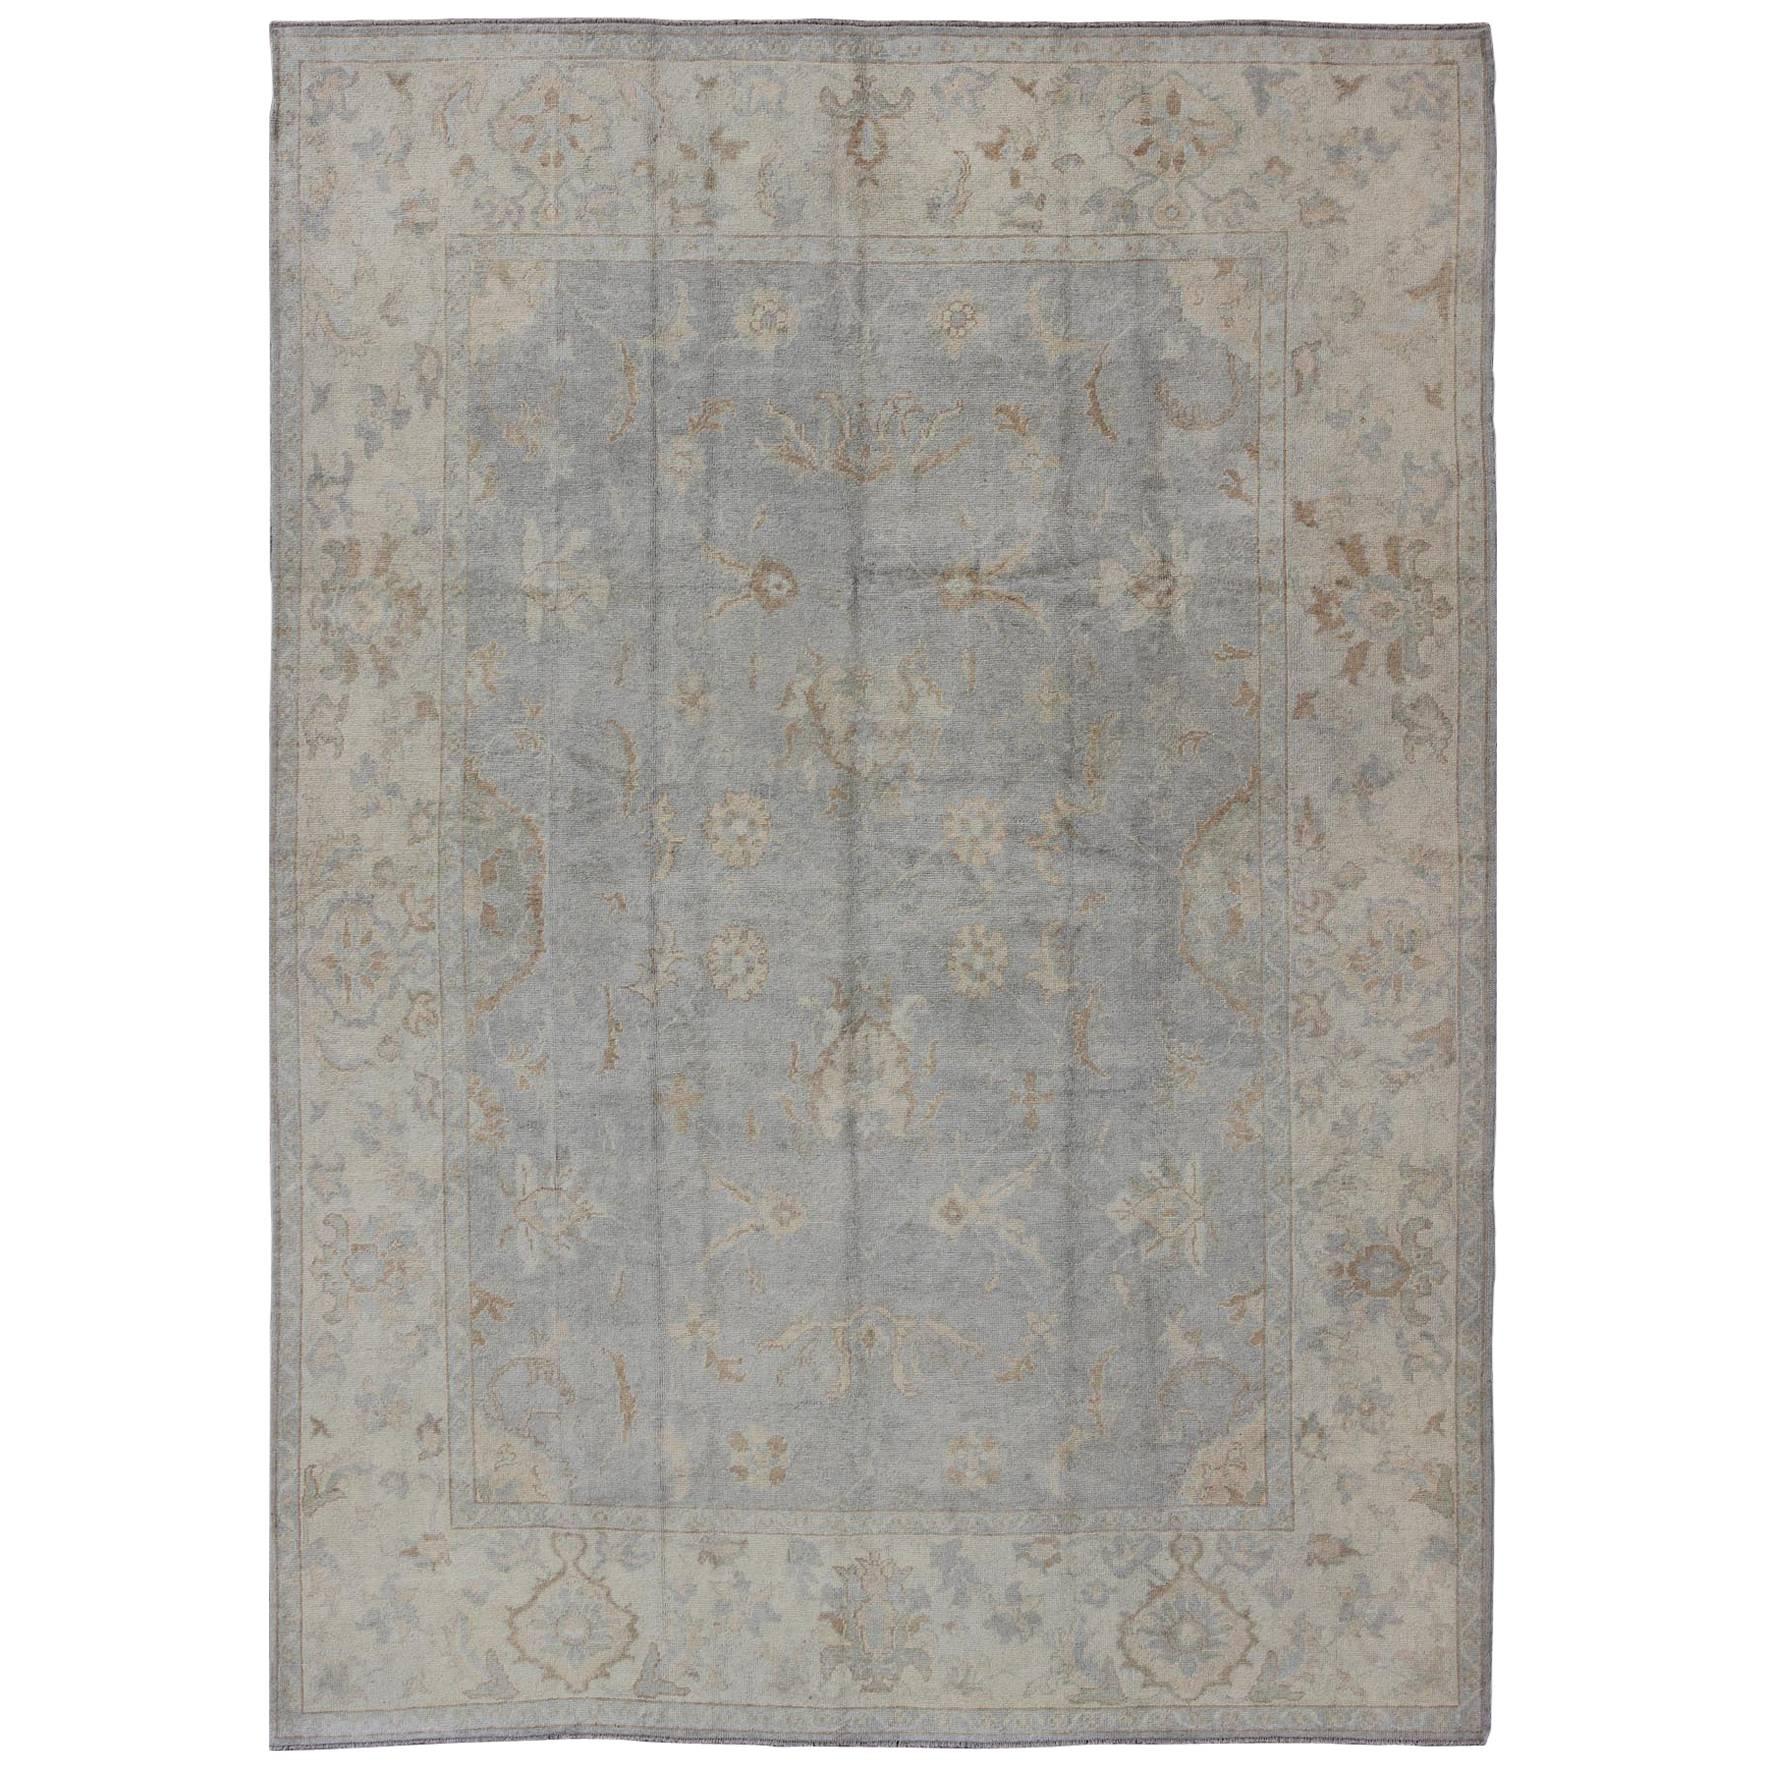 Faded Turkish Oushak Rug with All-Over Vining Floral Design in Grey and Cream